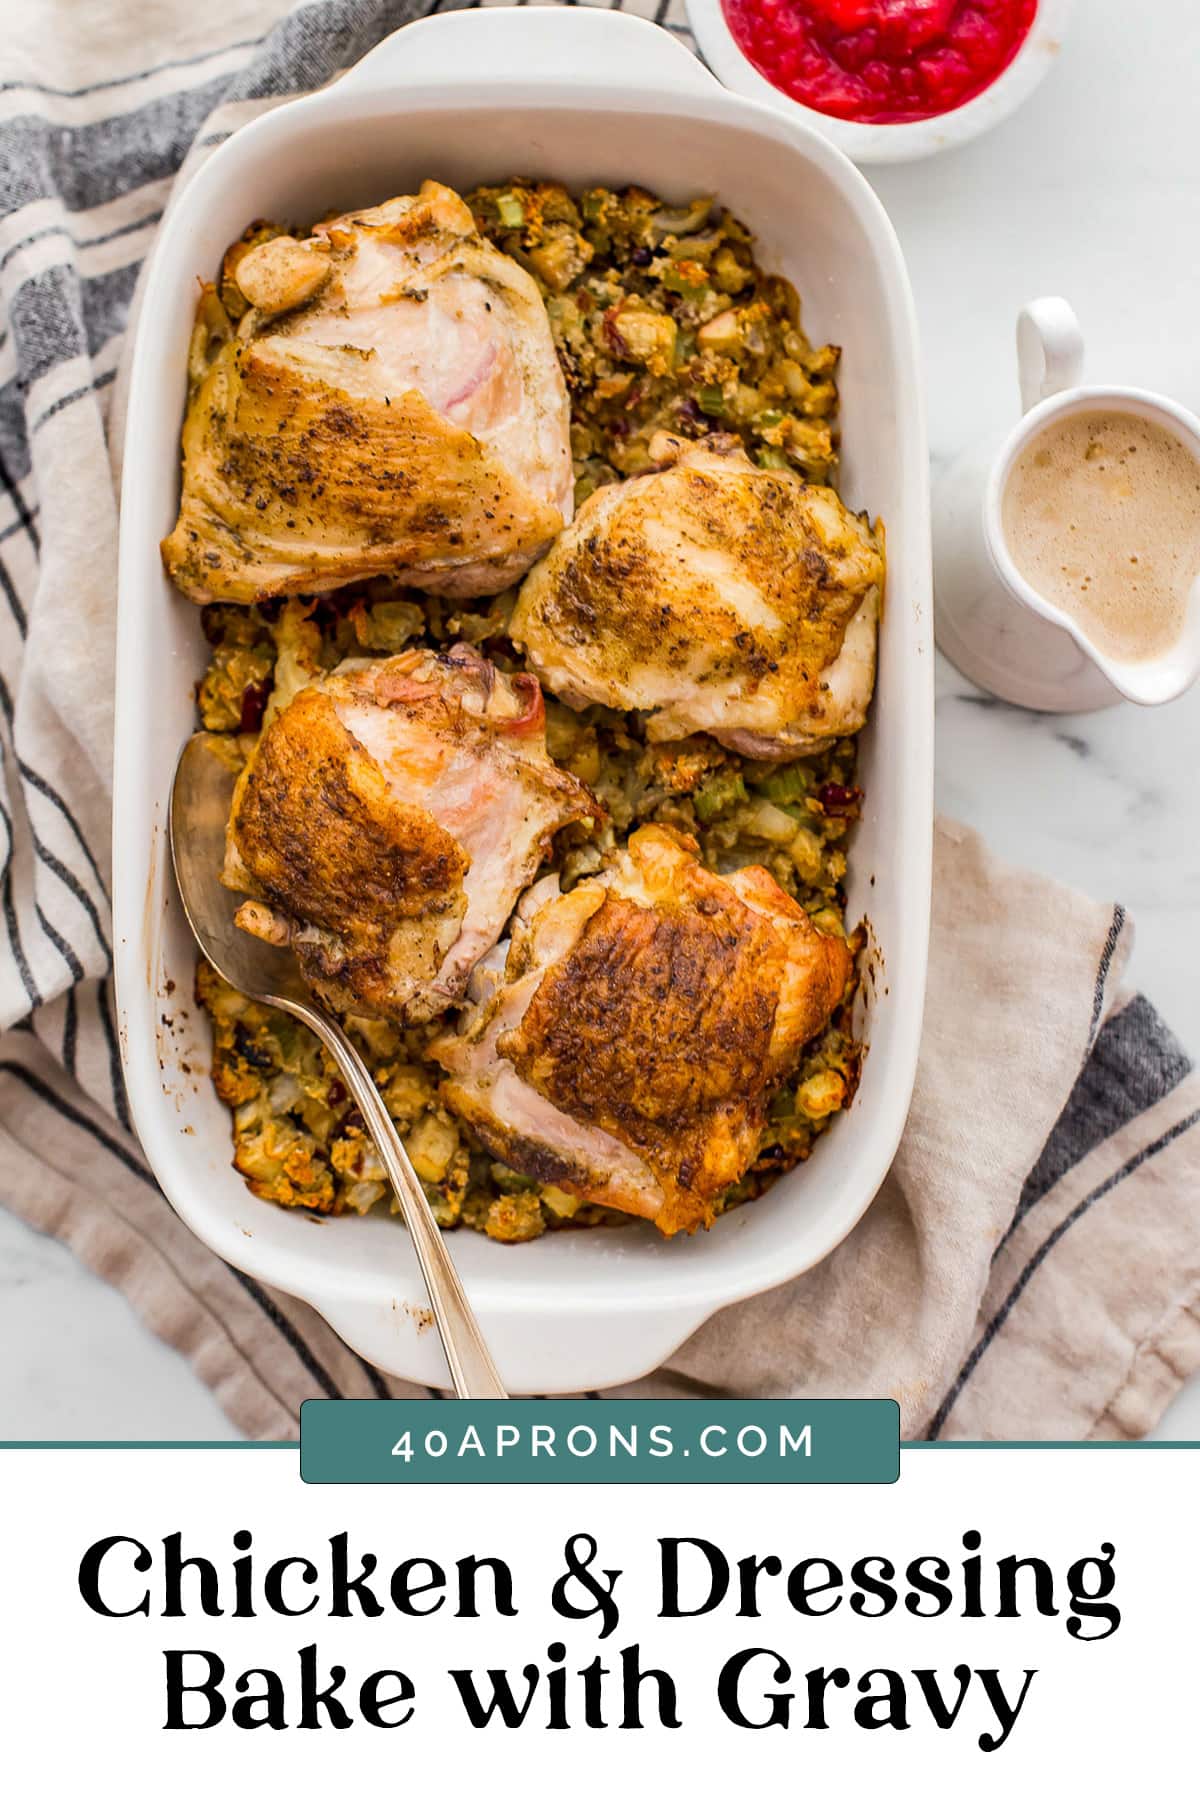 Graphic for Chicken and dressing bake with gravy.